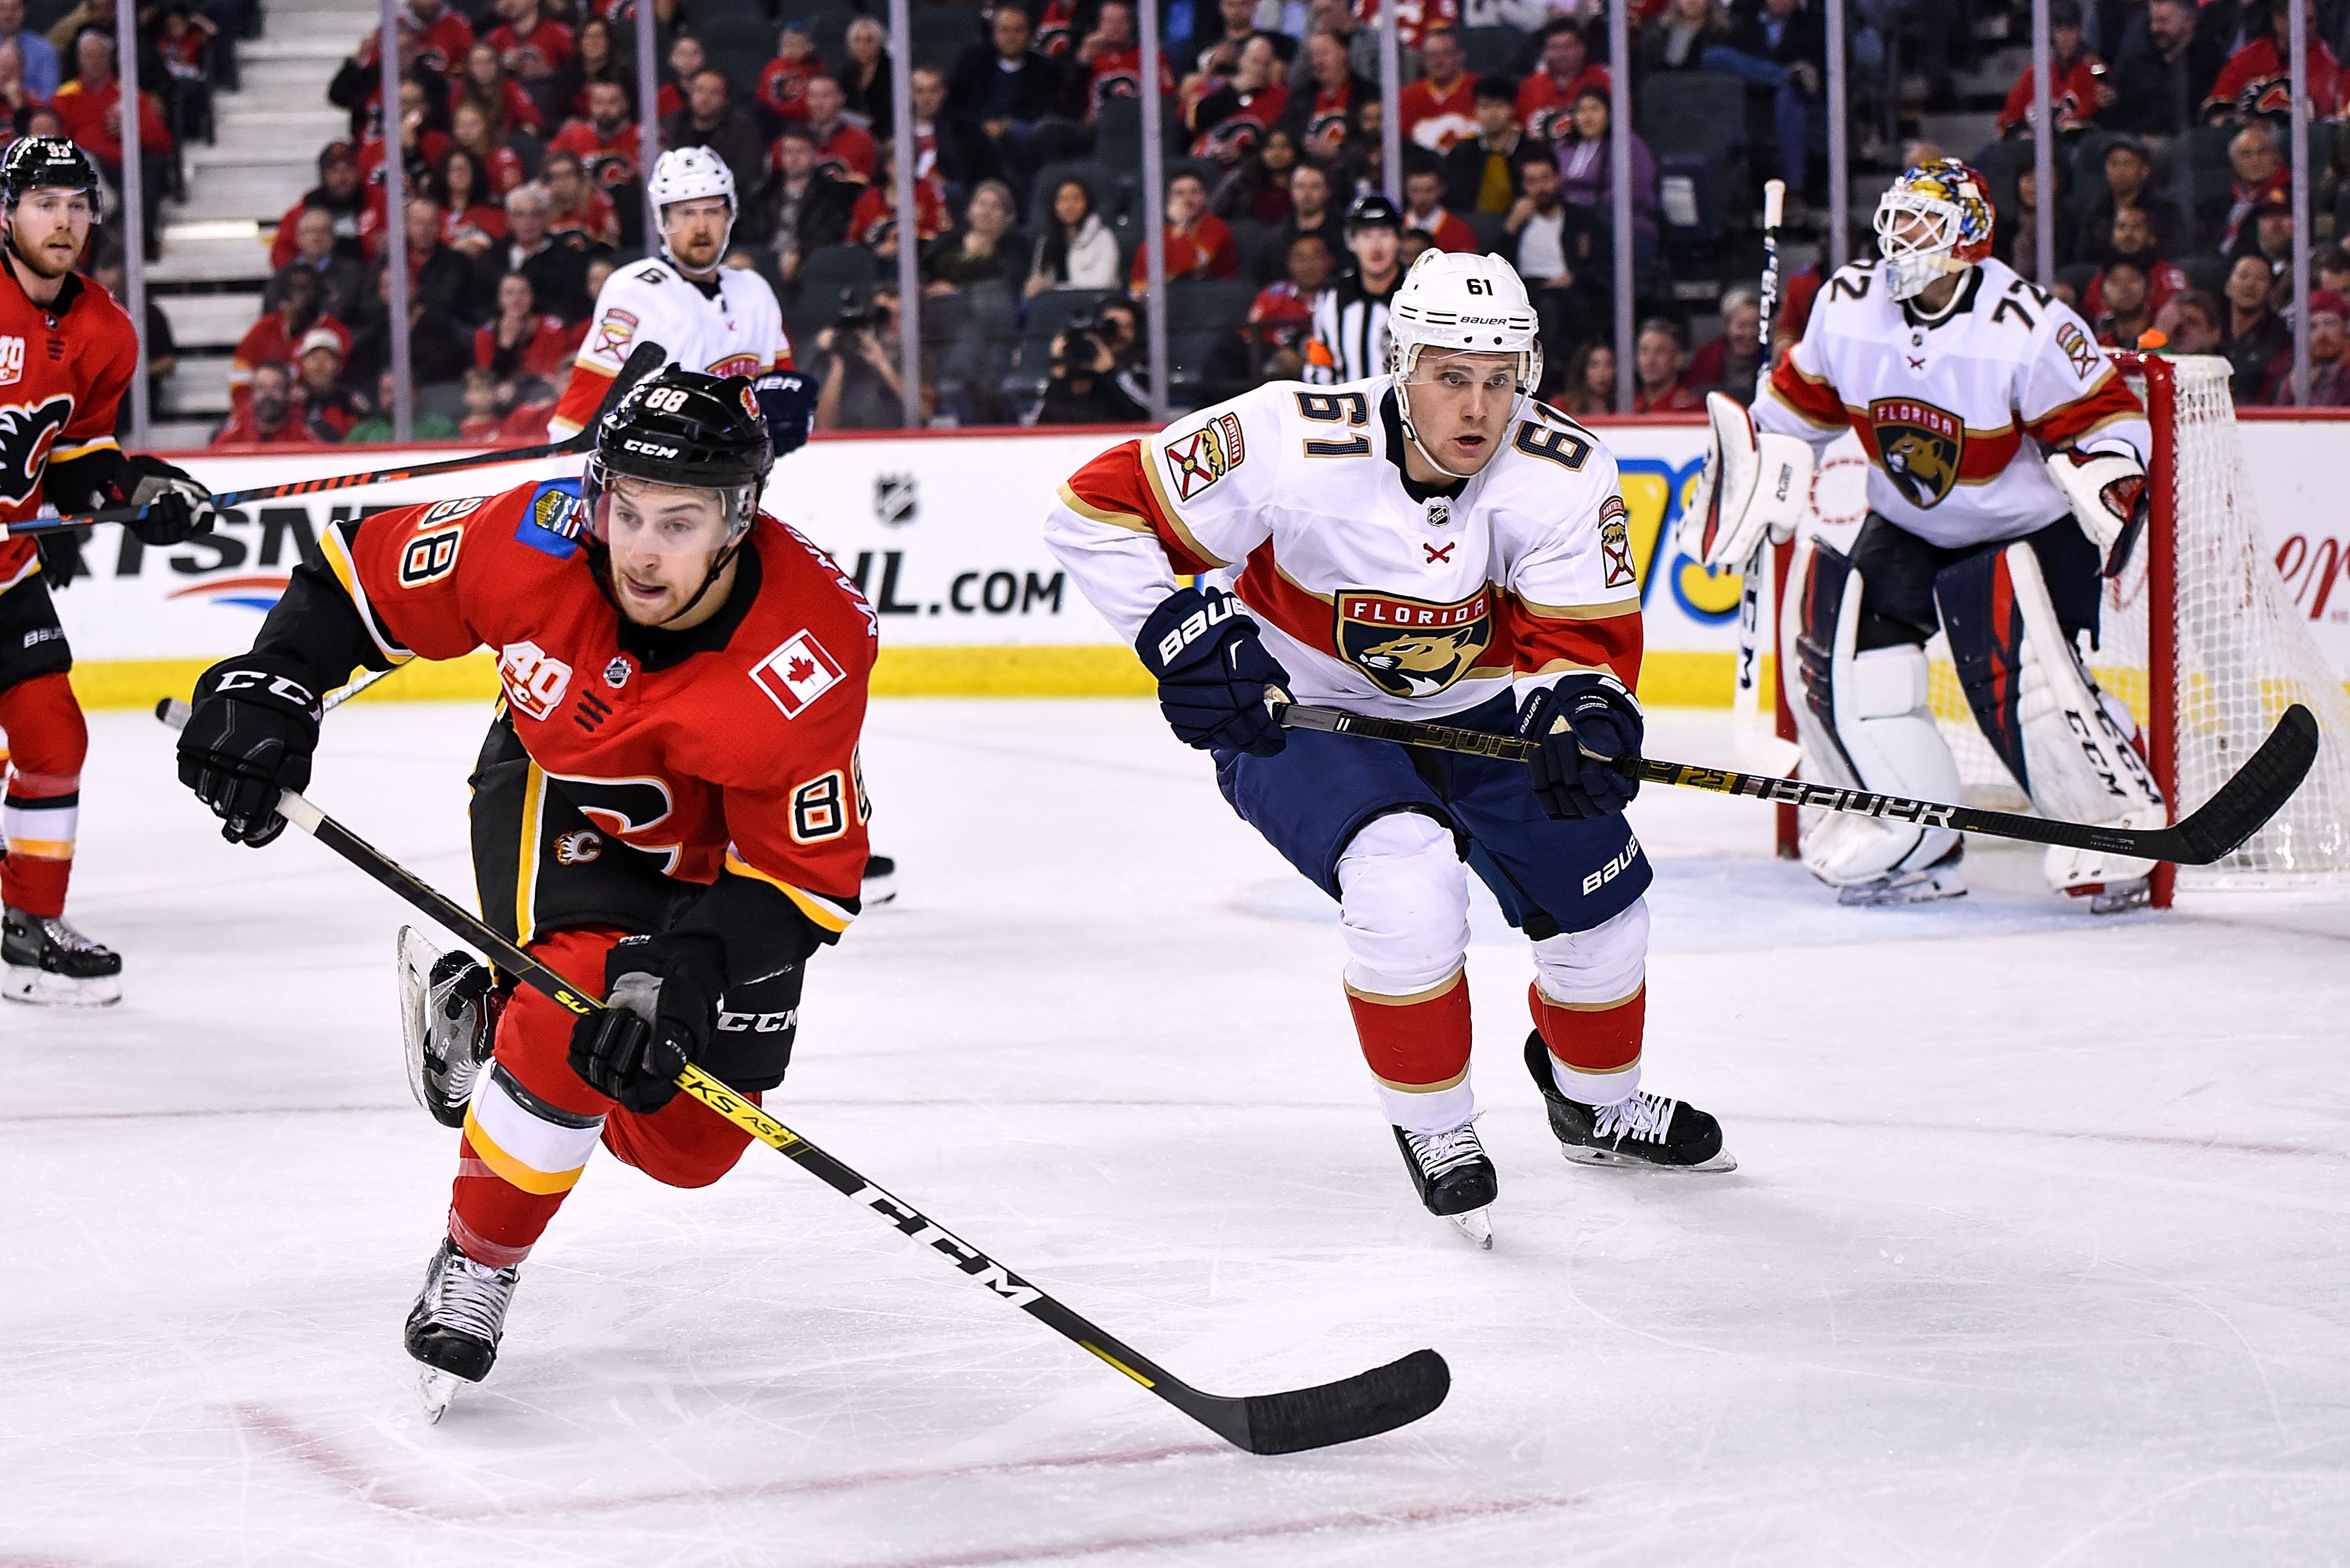 NHL: OCT 24 Panthers at Flames